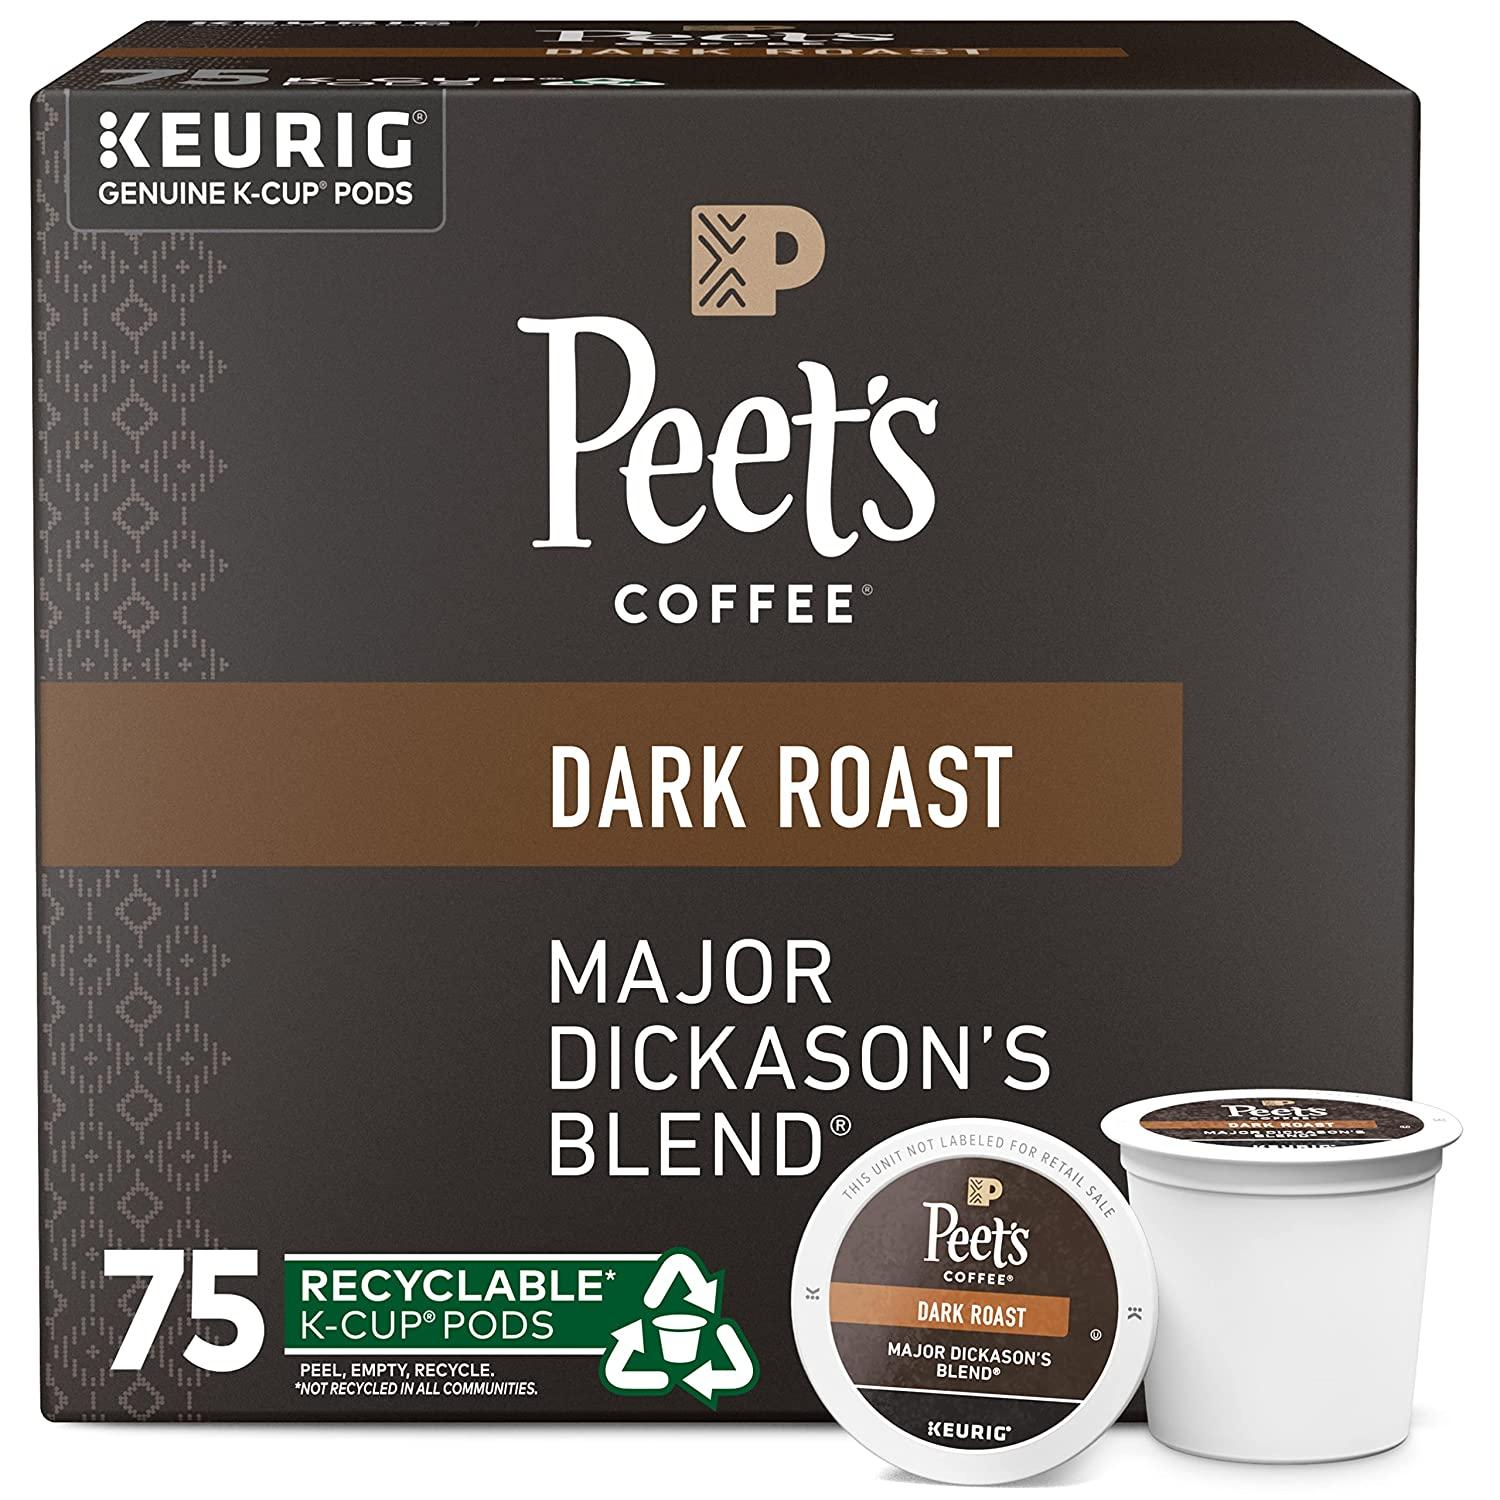 75 Peets Coffee Dark Roast K-Cup Pods for $29.29 Shipped